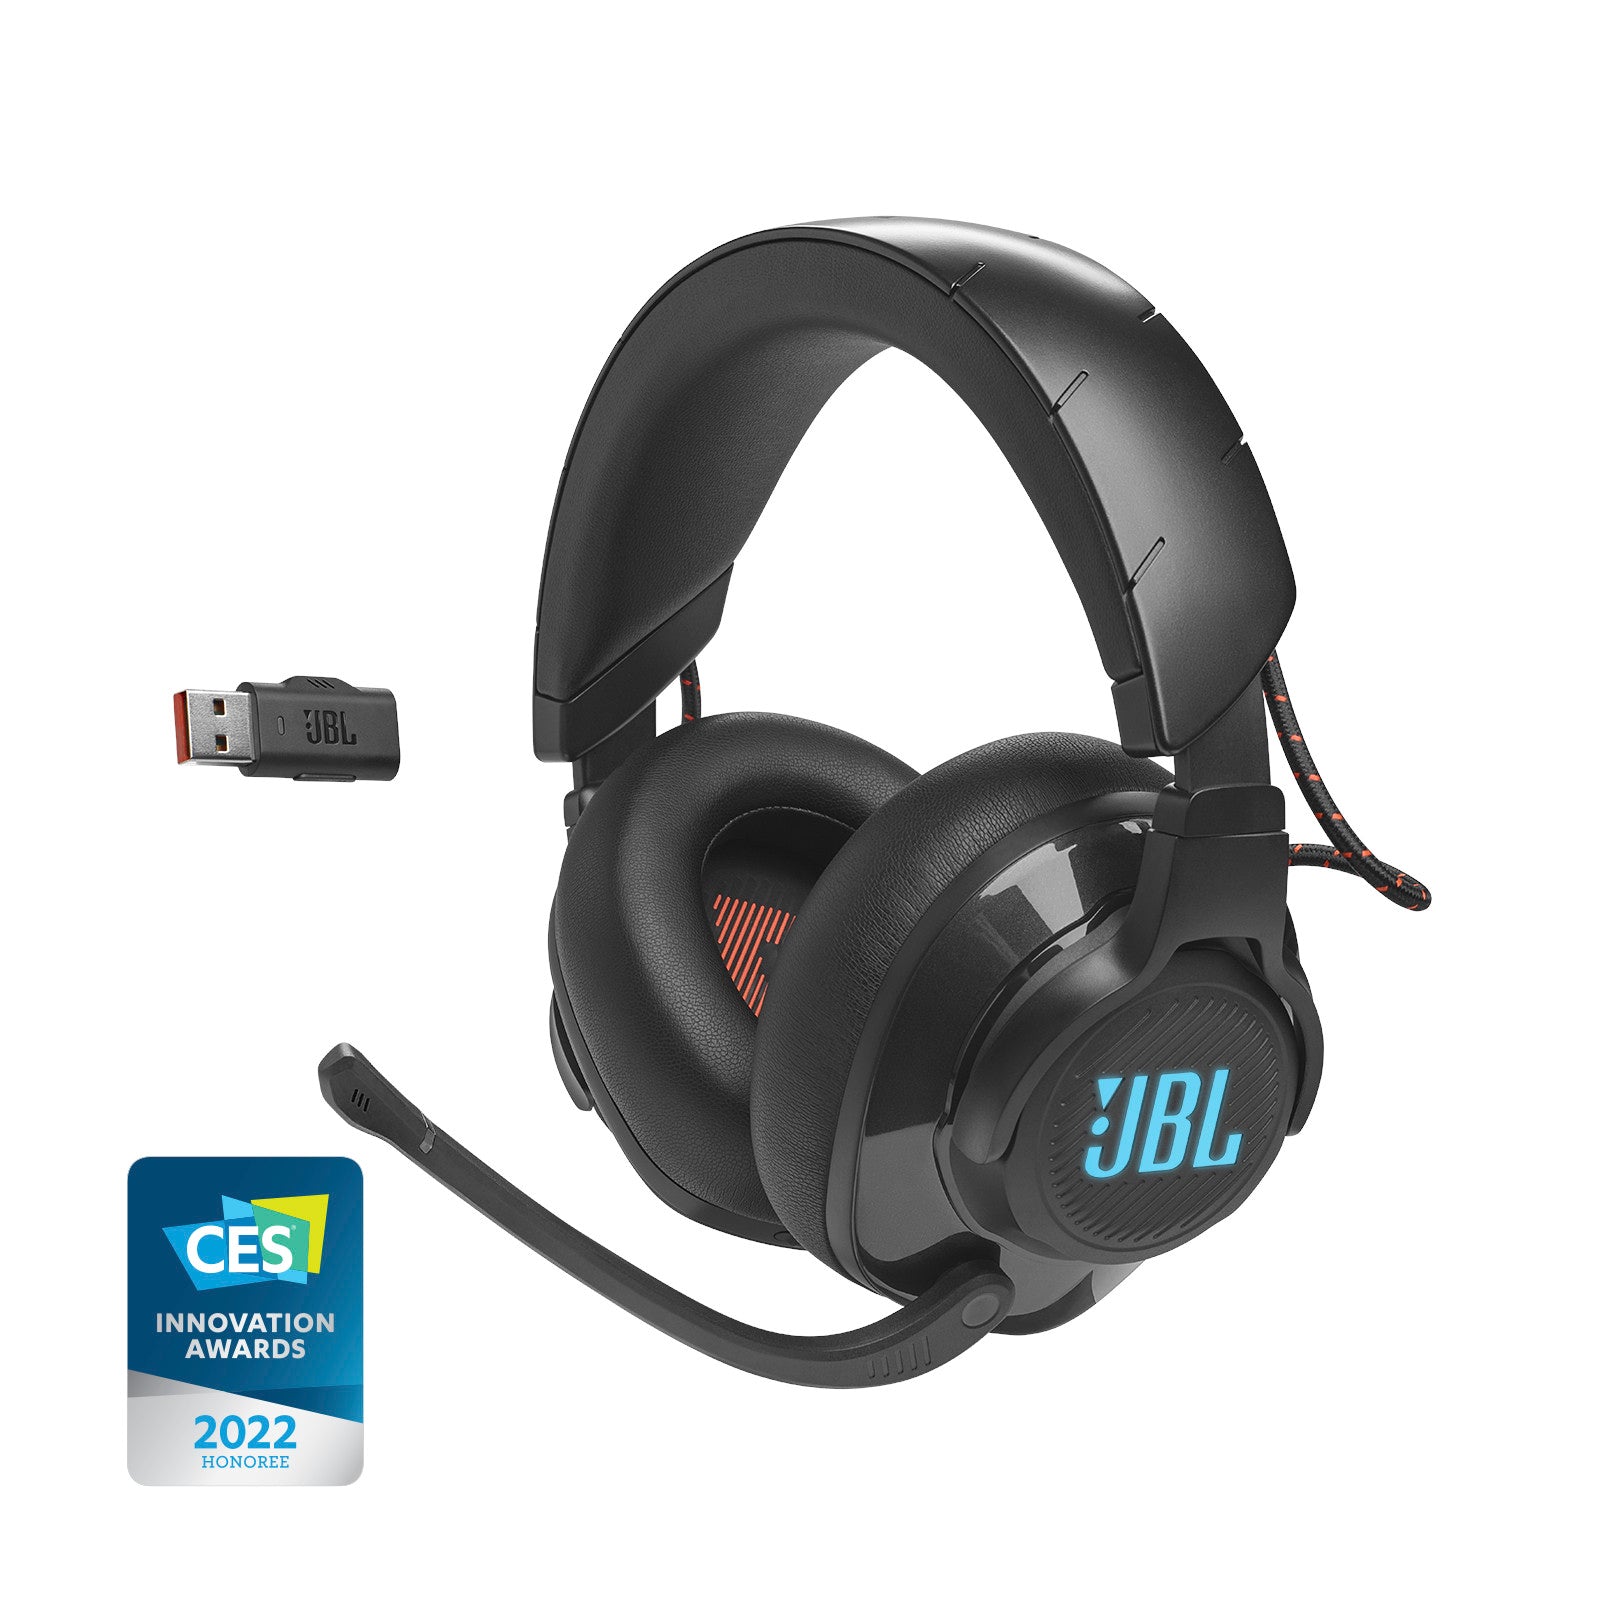 JBL Quantum 610 Headset Hero with CES Innovation Award 2022